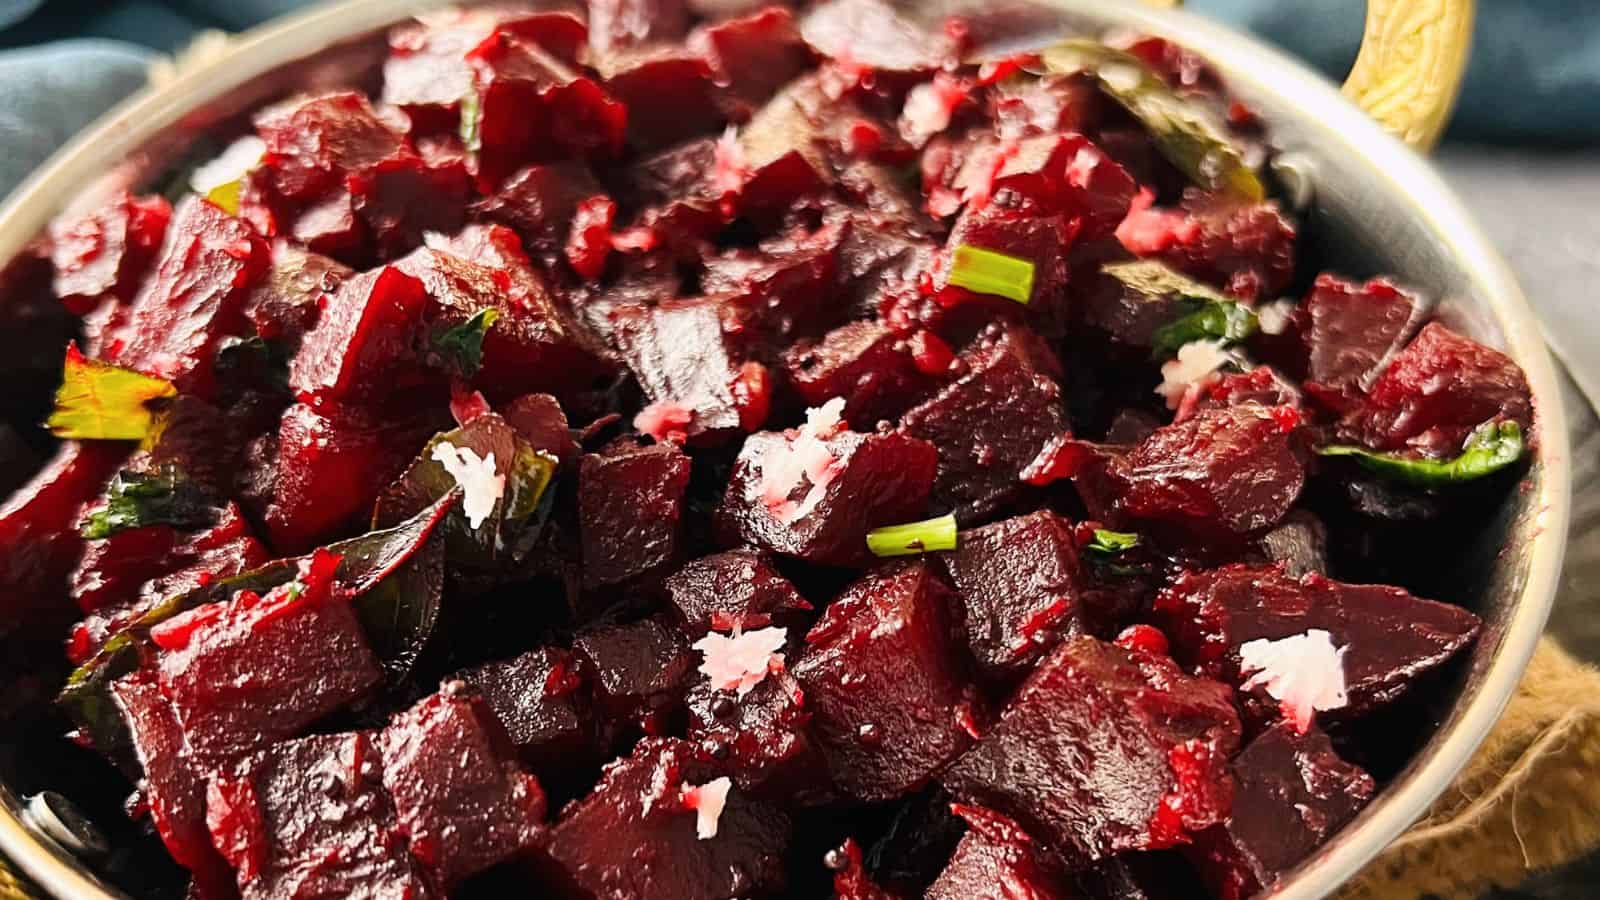 A bowl of diced Beetroot Palya garnished with herbs and sprinkled with salt, served on a dark textured background.